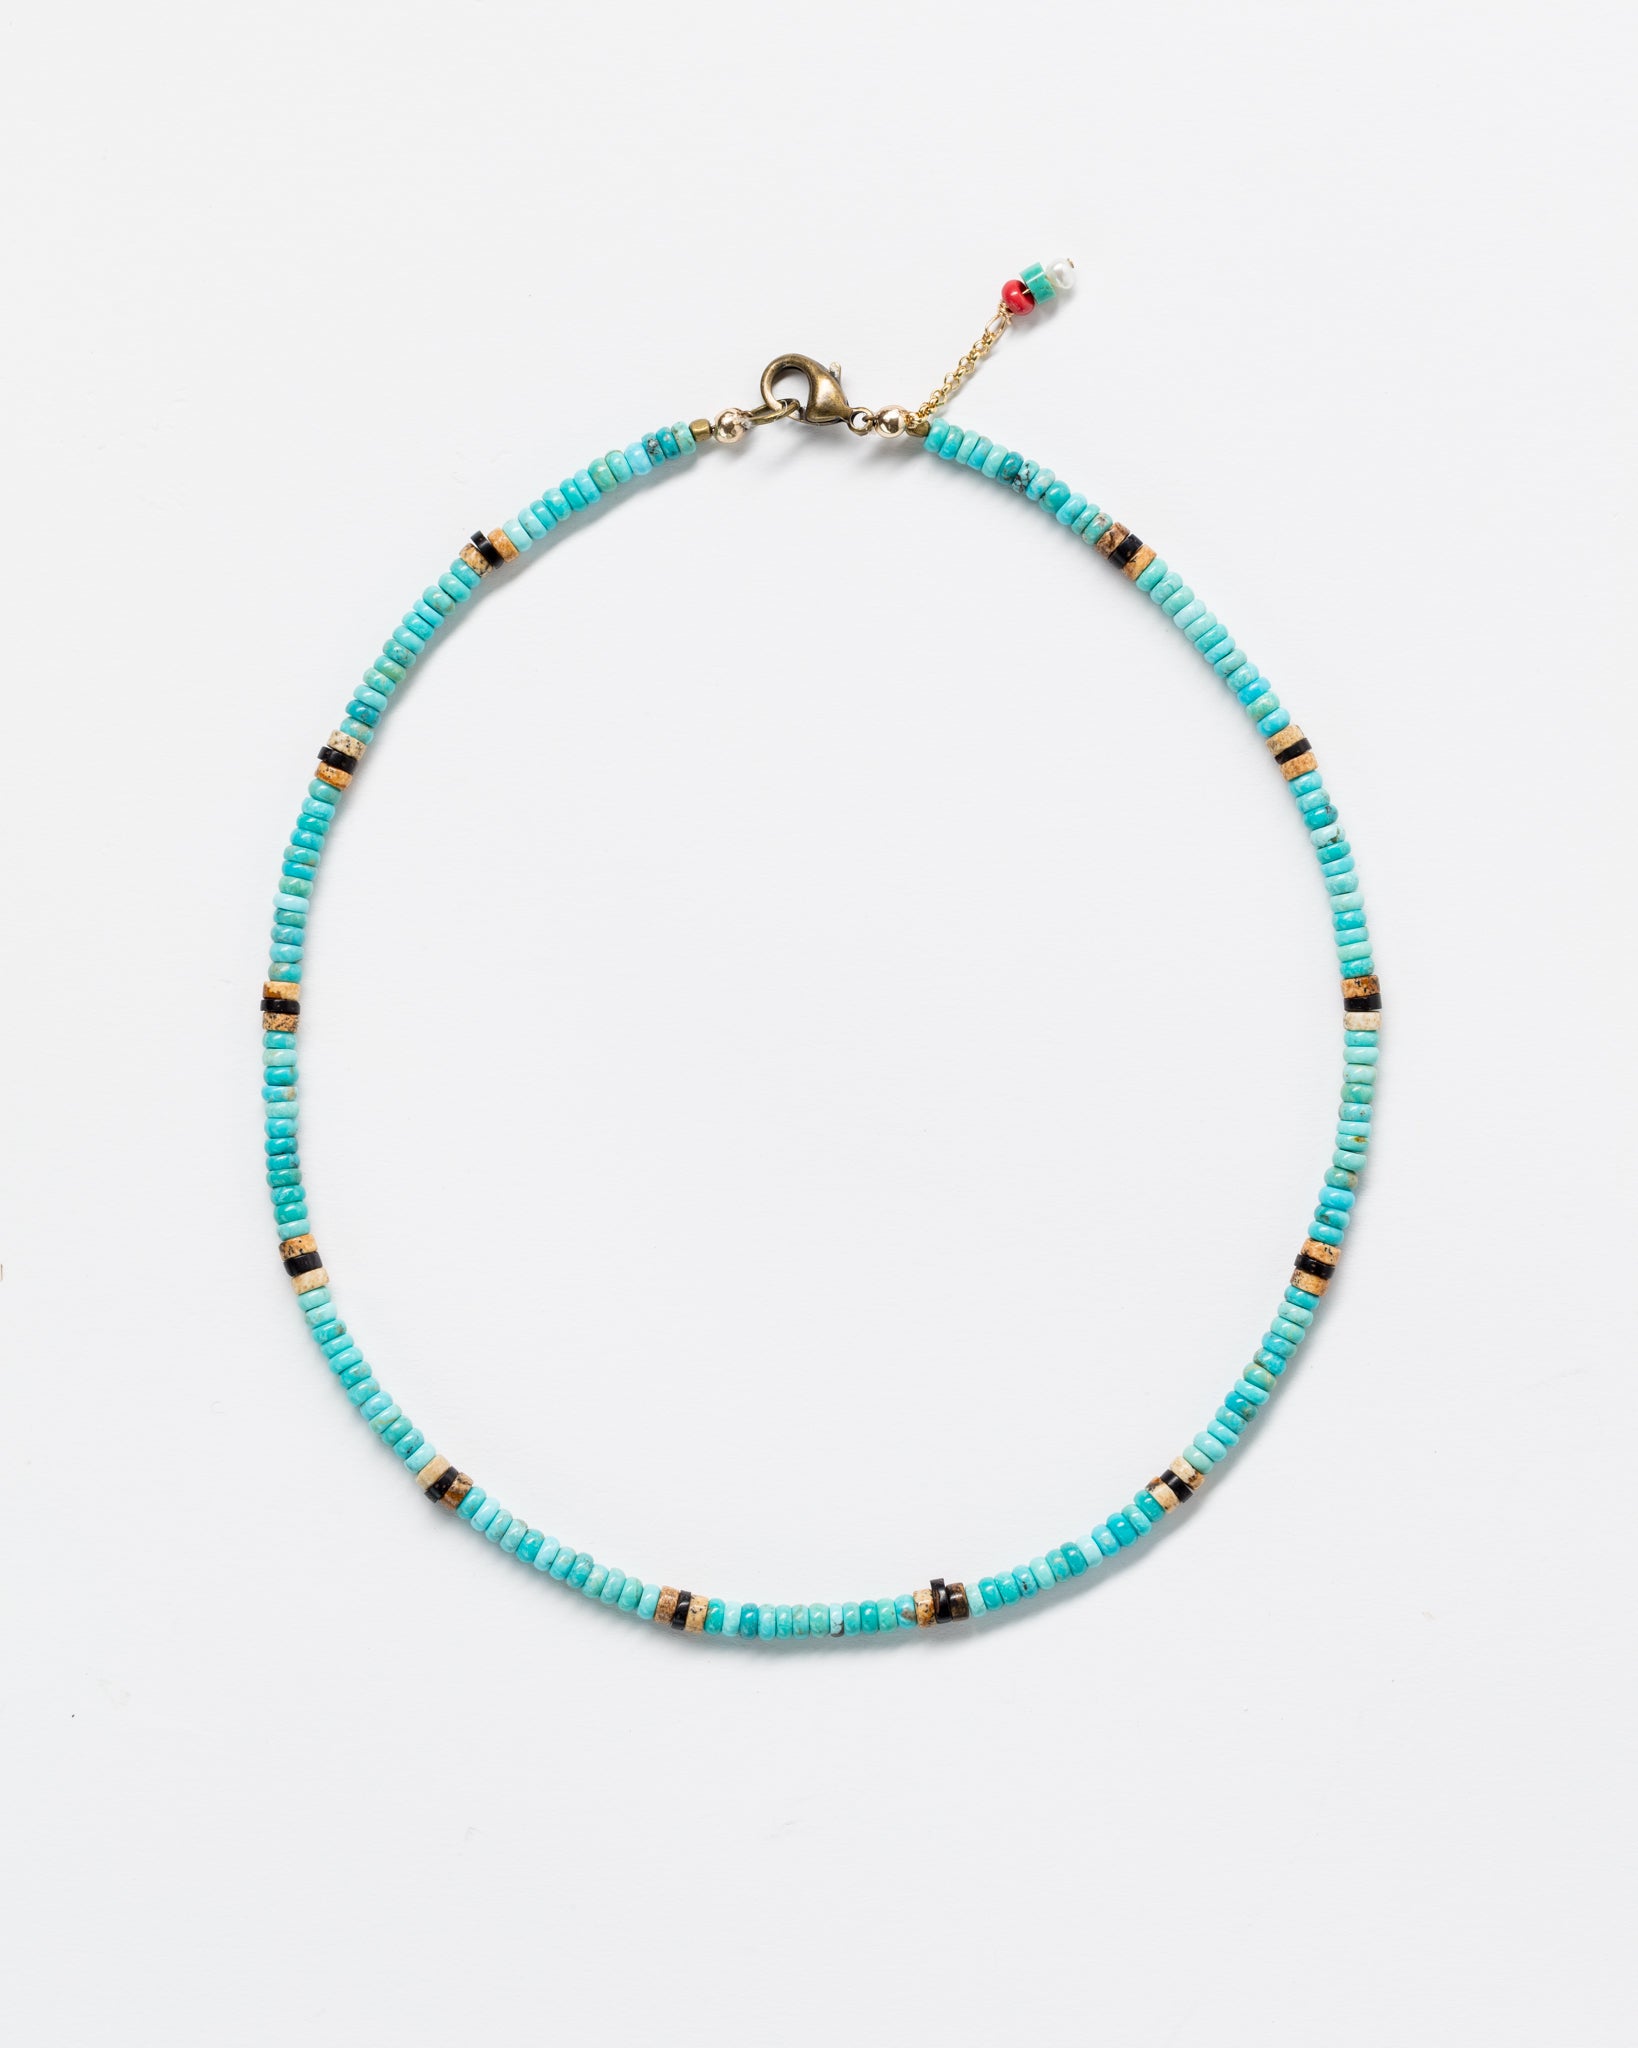 Turquoise Designs By Raya necklace displayed against a white background, featuring a delicate gold clasp with a small Arizona-style charm.